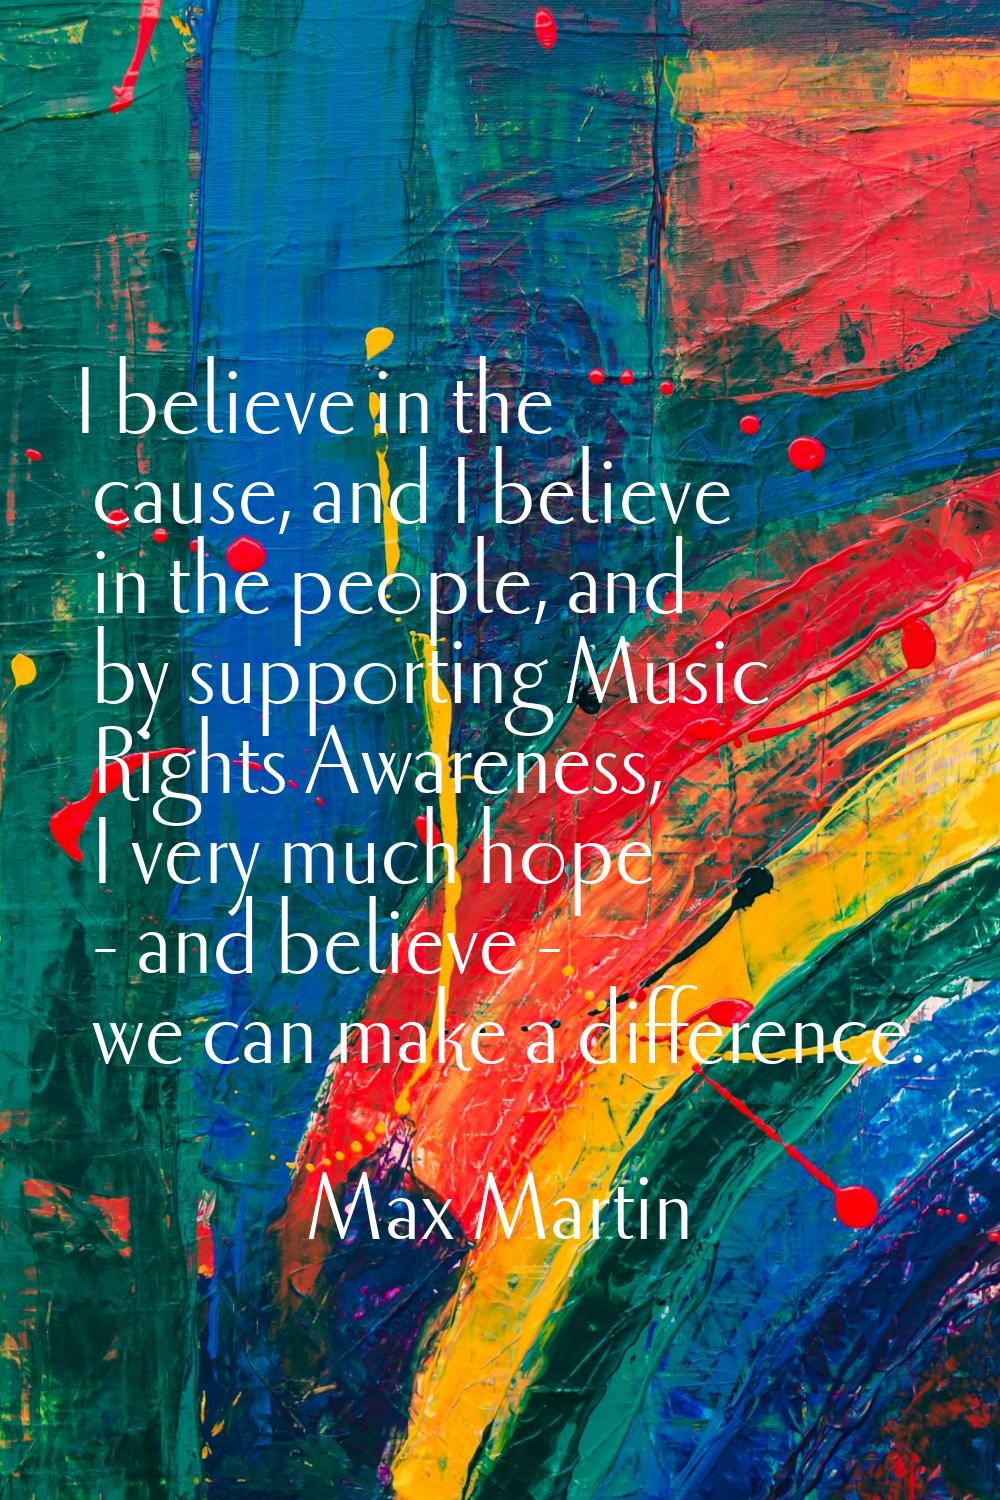 I believe in the cause, and I believe in the people, and by supporting Music Rights Awareness, I ve